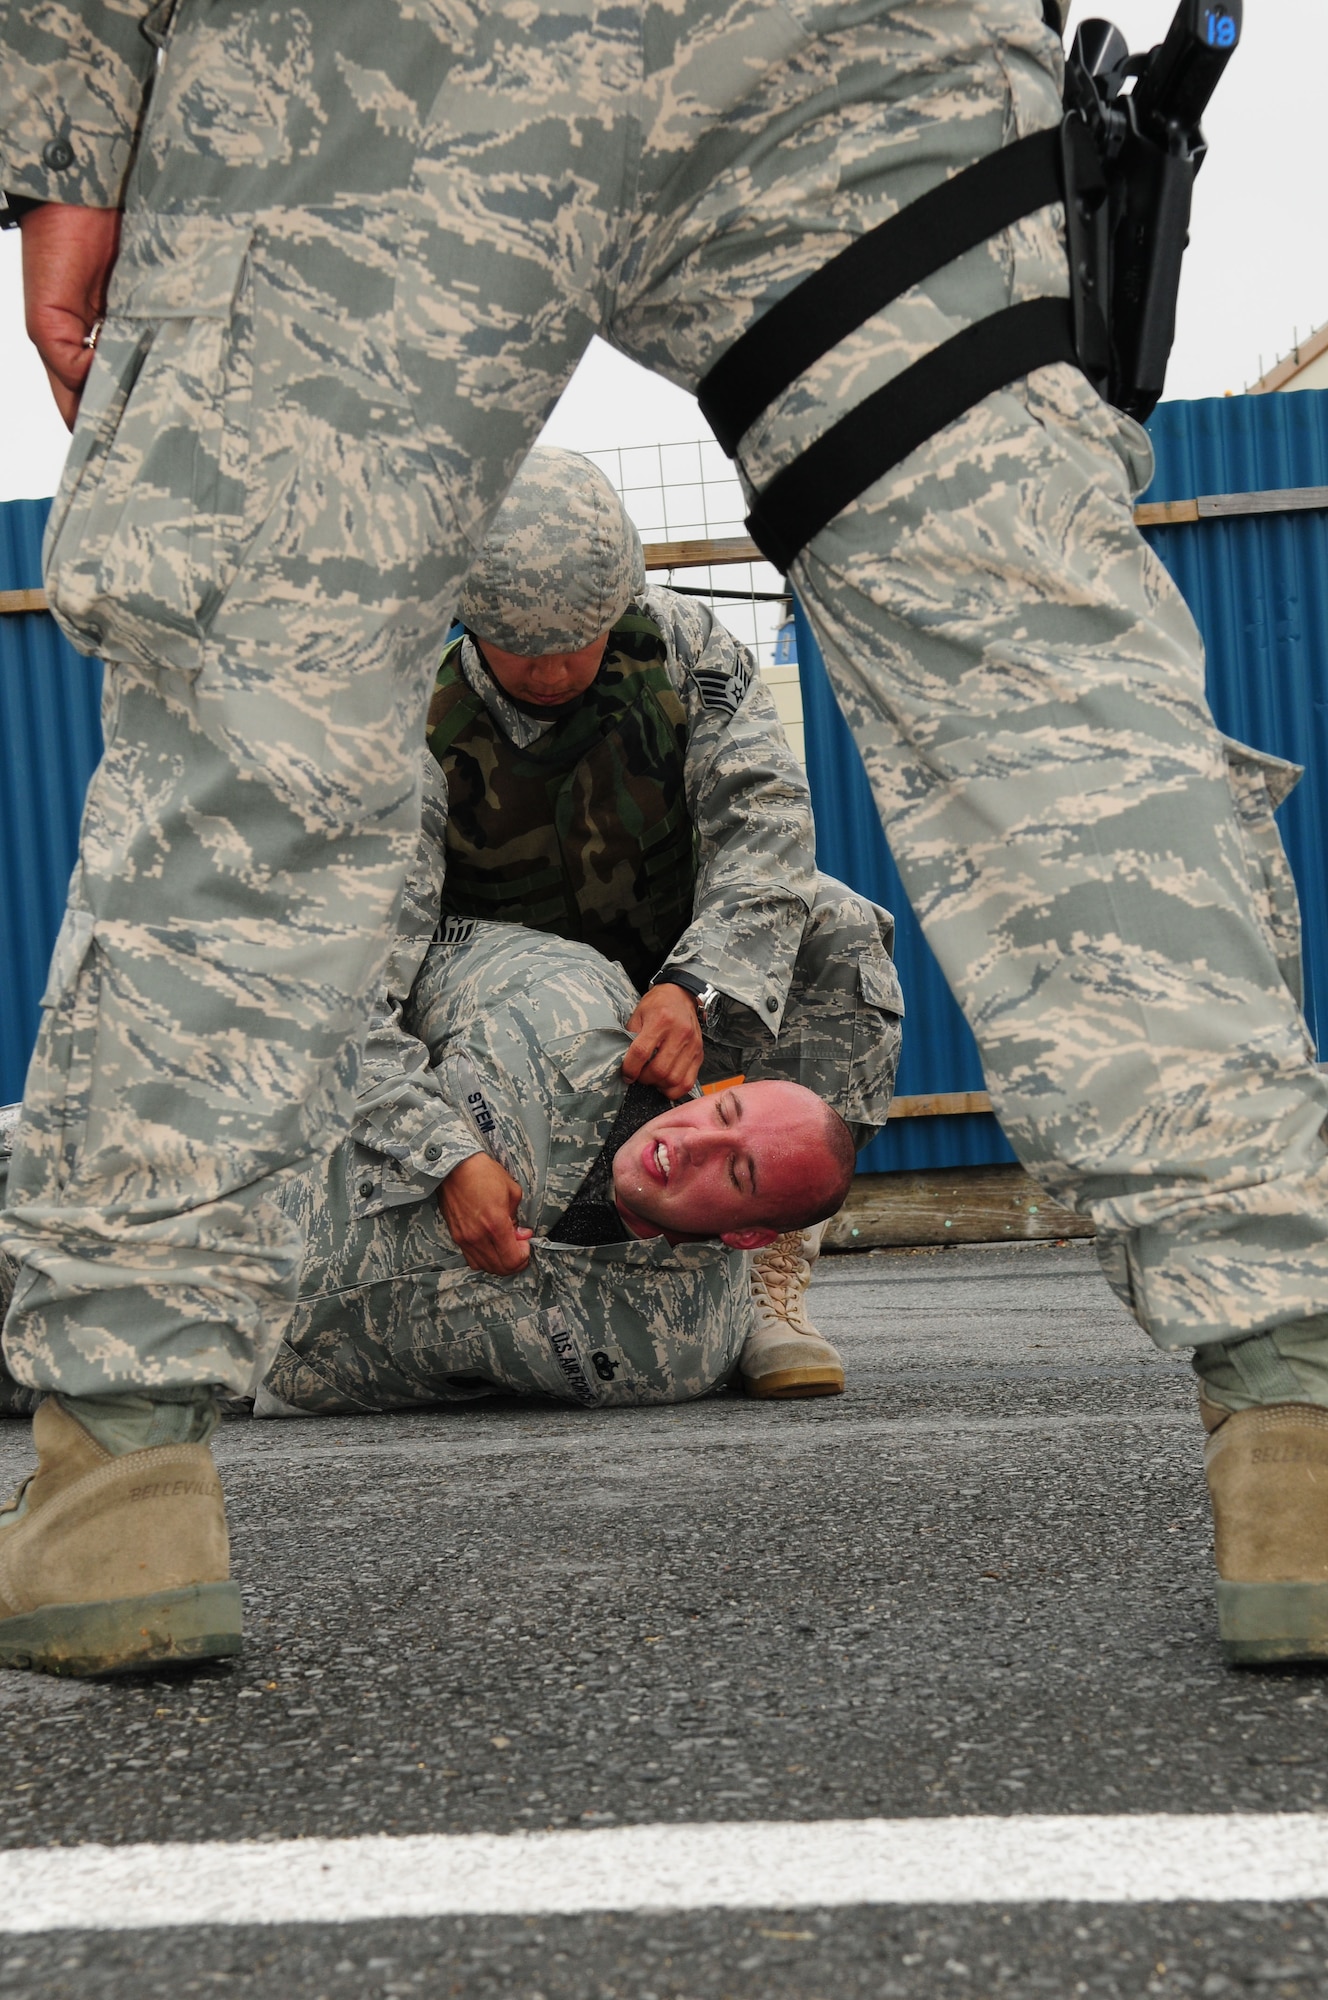 Staff Sgt. Joshua Tyquiengco, 18th Security Forces Squadron, apprehends a simulated bank robber during Beverly High 09-2 Local Operational Readiness Exercise May 12. The LORE tests base personnel on their readiness for real world emergency/combat events. (U.S. Air Force photo/Staff Sgt. Lakisha A. Croley)